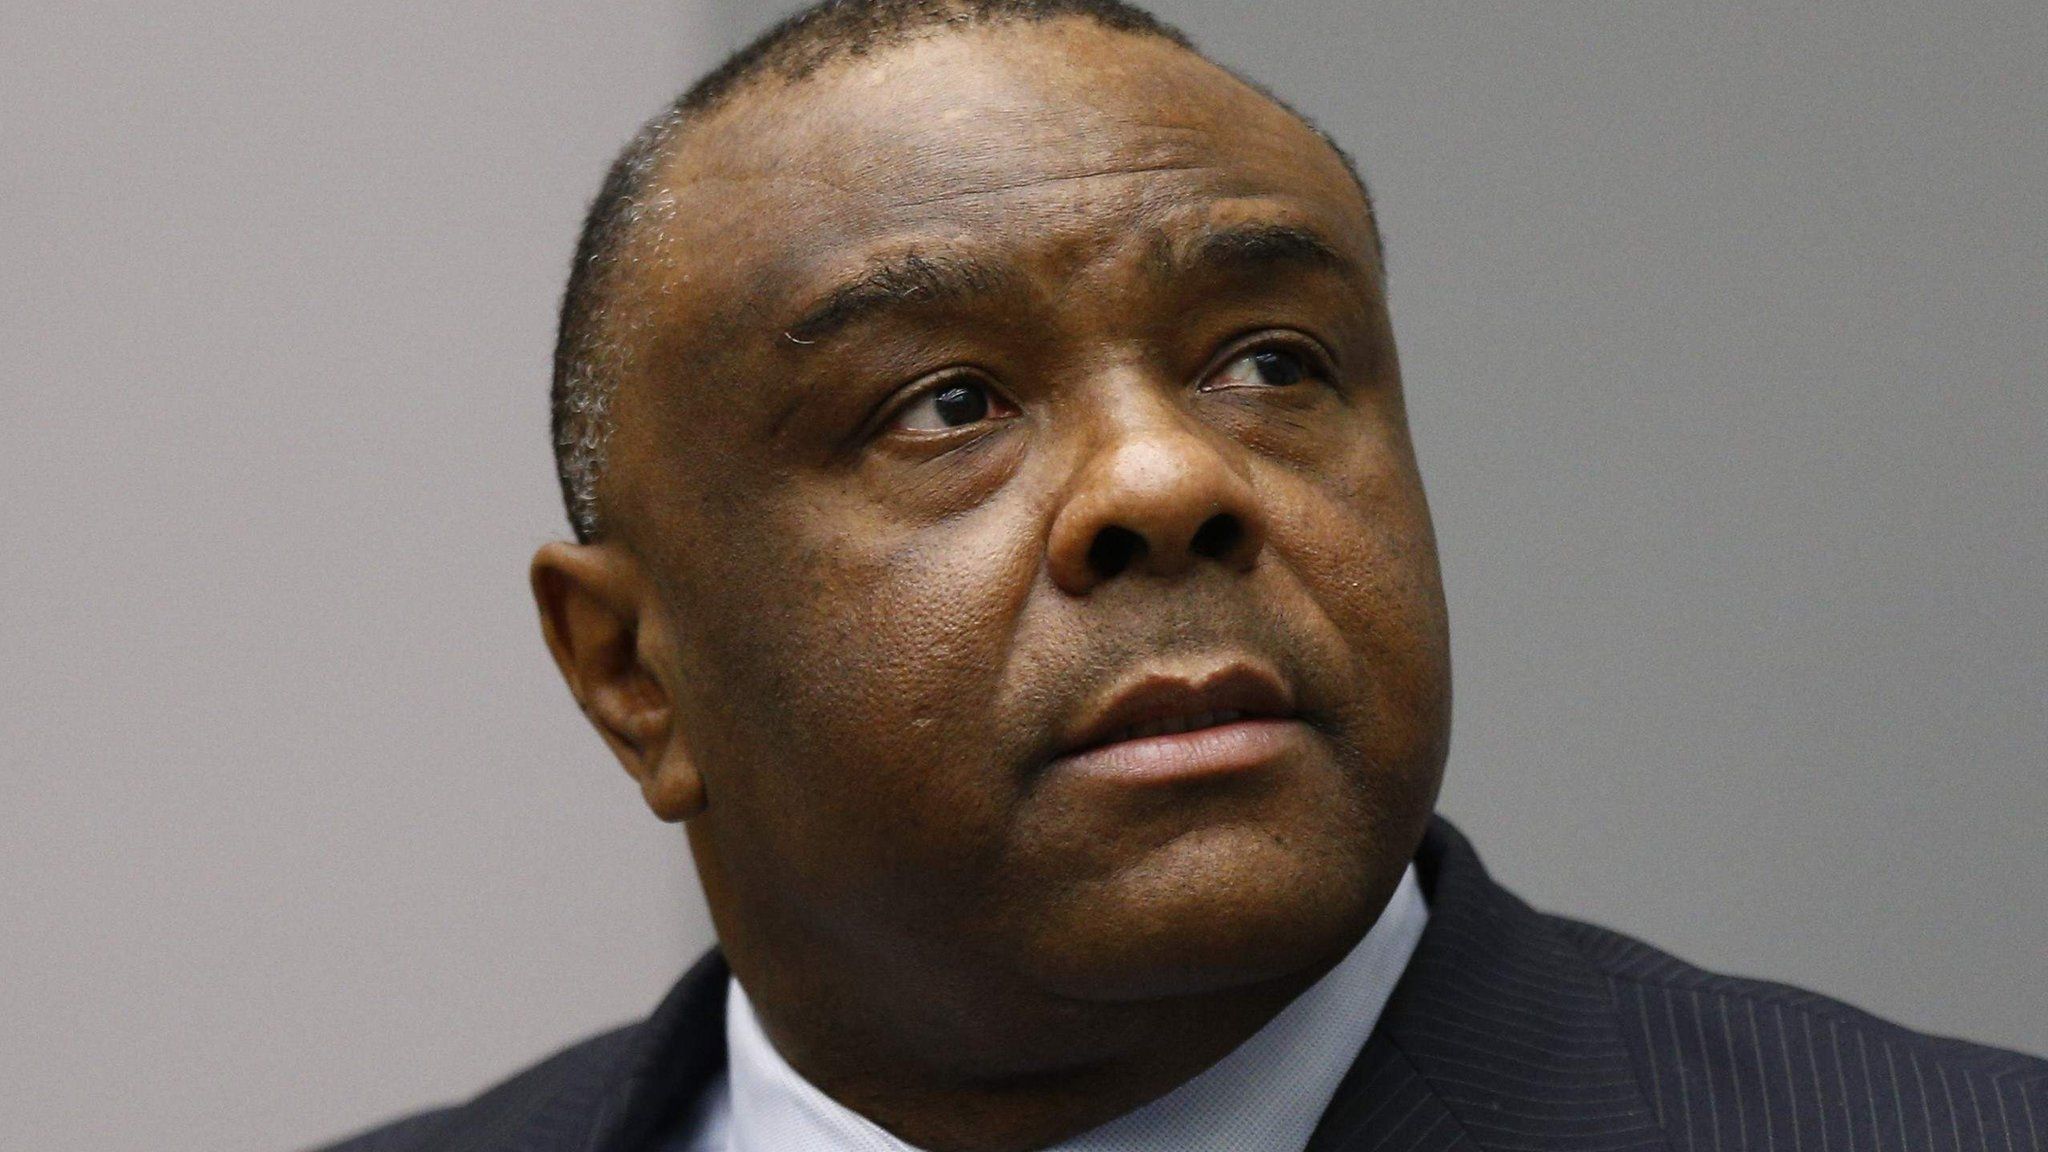 Former Congolese vice-president Jean-Pierre Bemba in courtroom of International Criminal Court in The Hague. June 2016